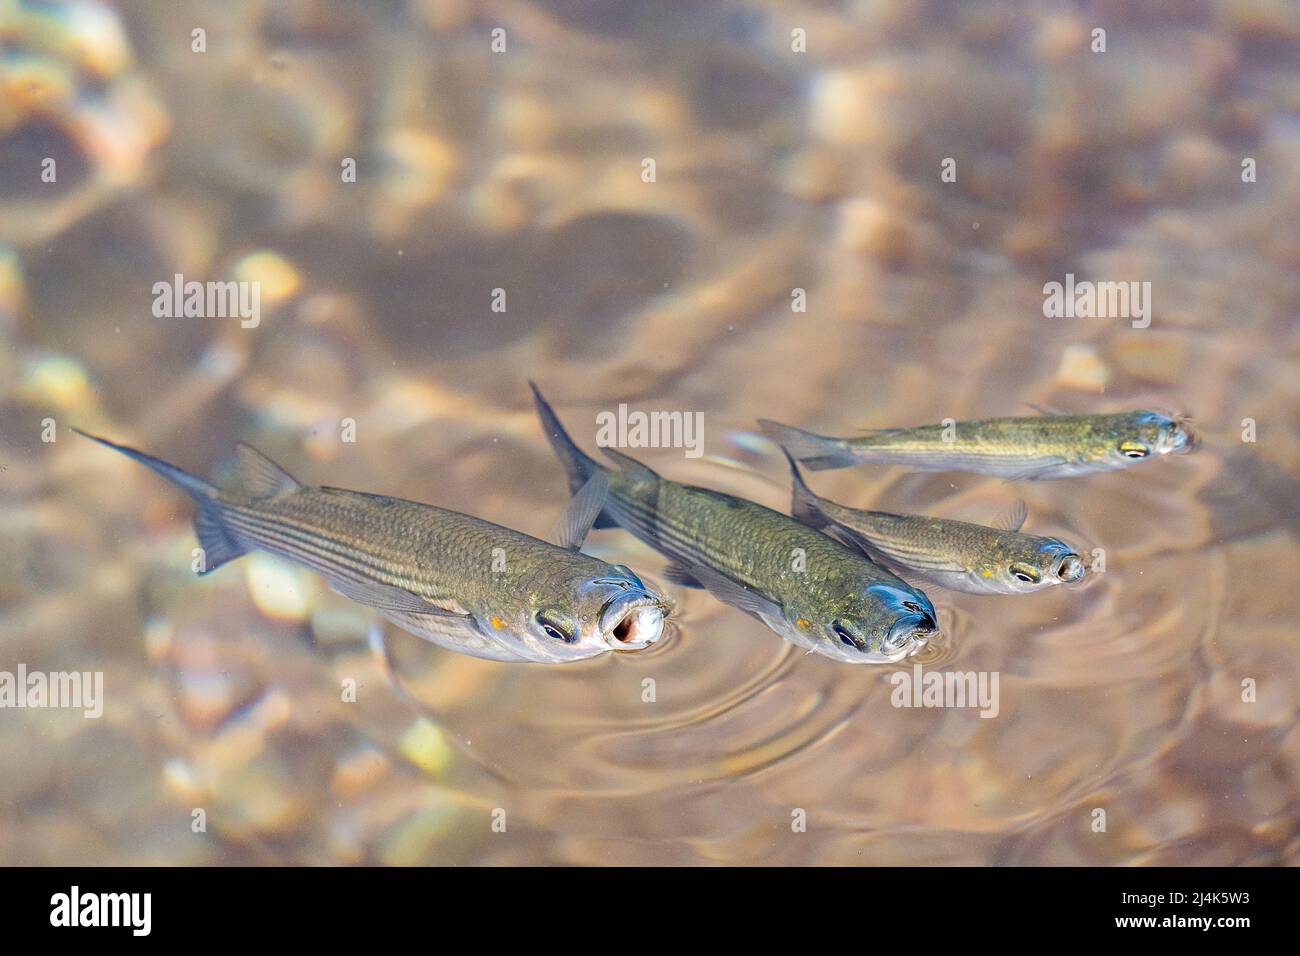 School of thicklip grey mullet, Chelon labrosus, a coastal fish of the family Mugilidae, search food at the surface, in Atlantic Ocean. Stock Photo